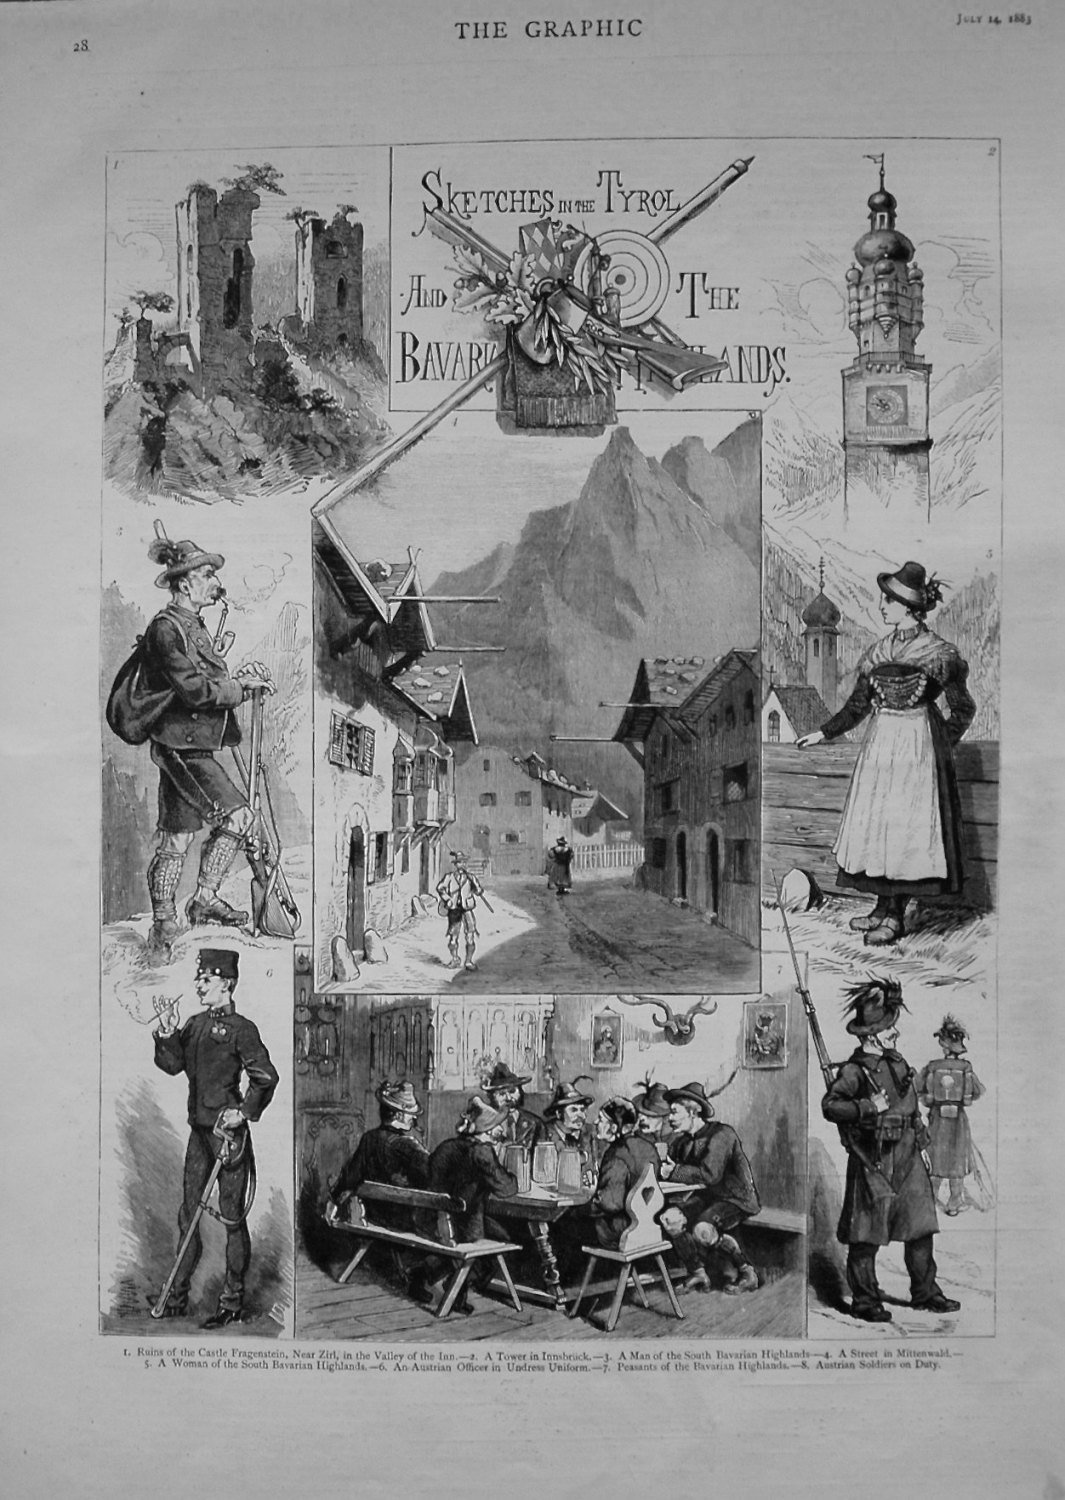 Sketches in the Tyrol and the Bavarian Highlands. 1883